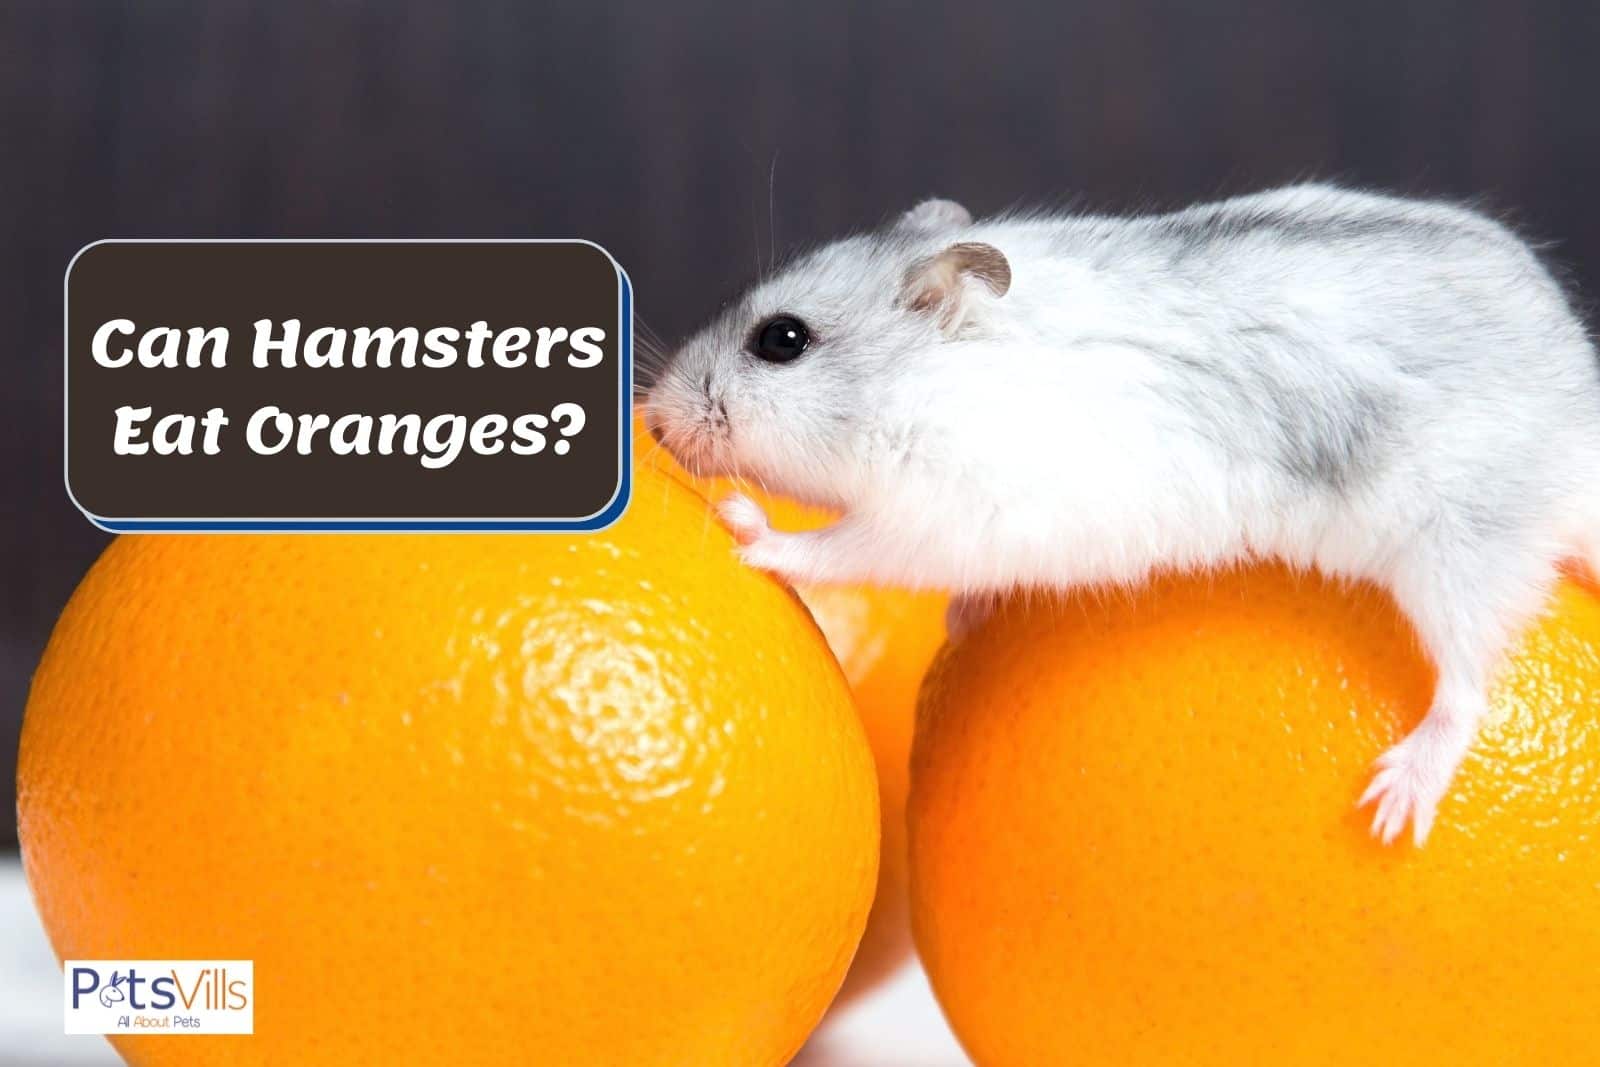 hammy smelling the fresh oranges but can hamsters eat oranges?